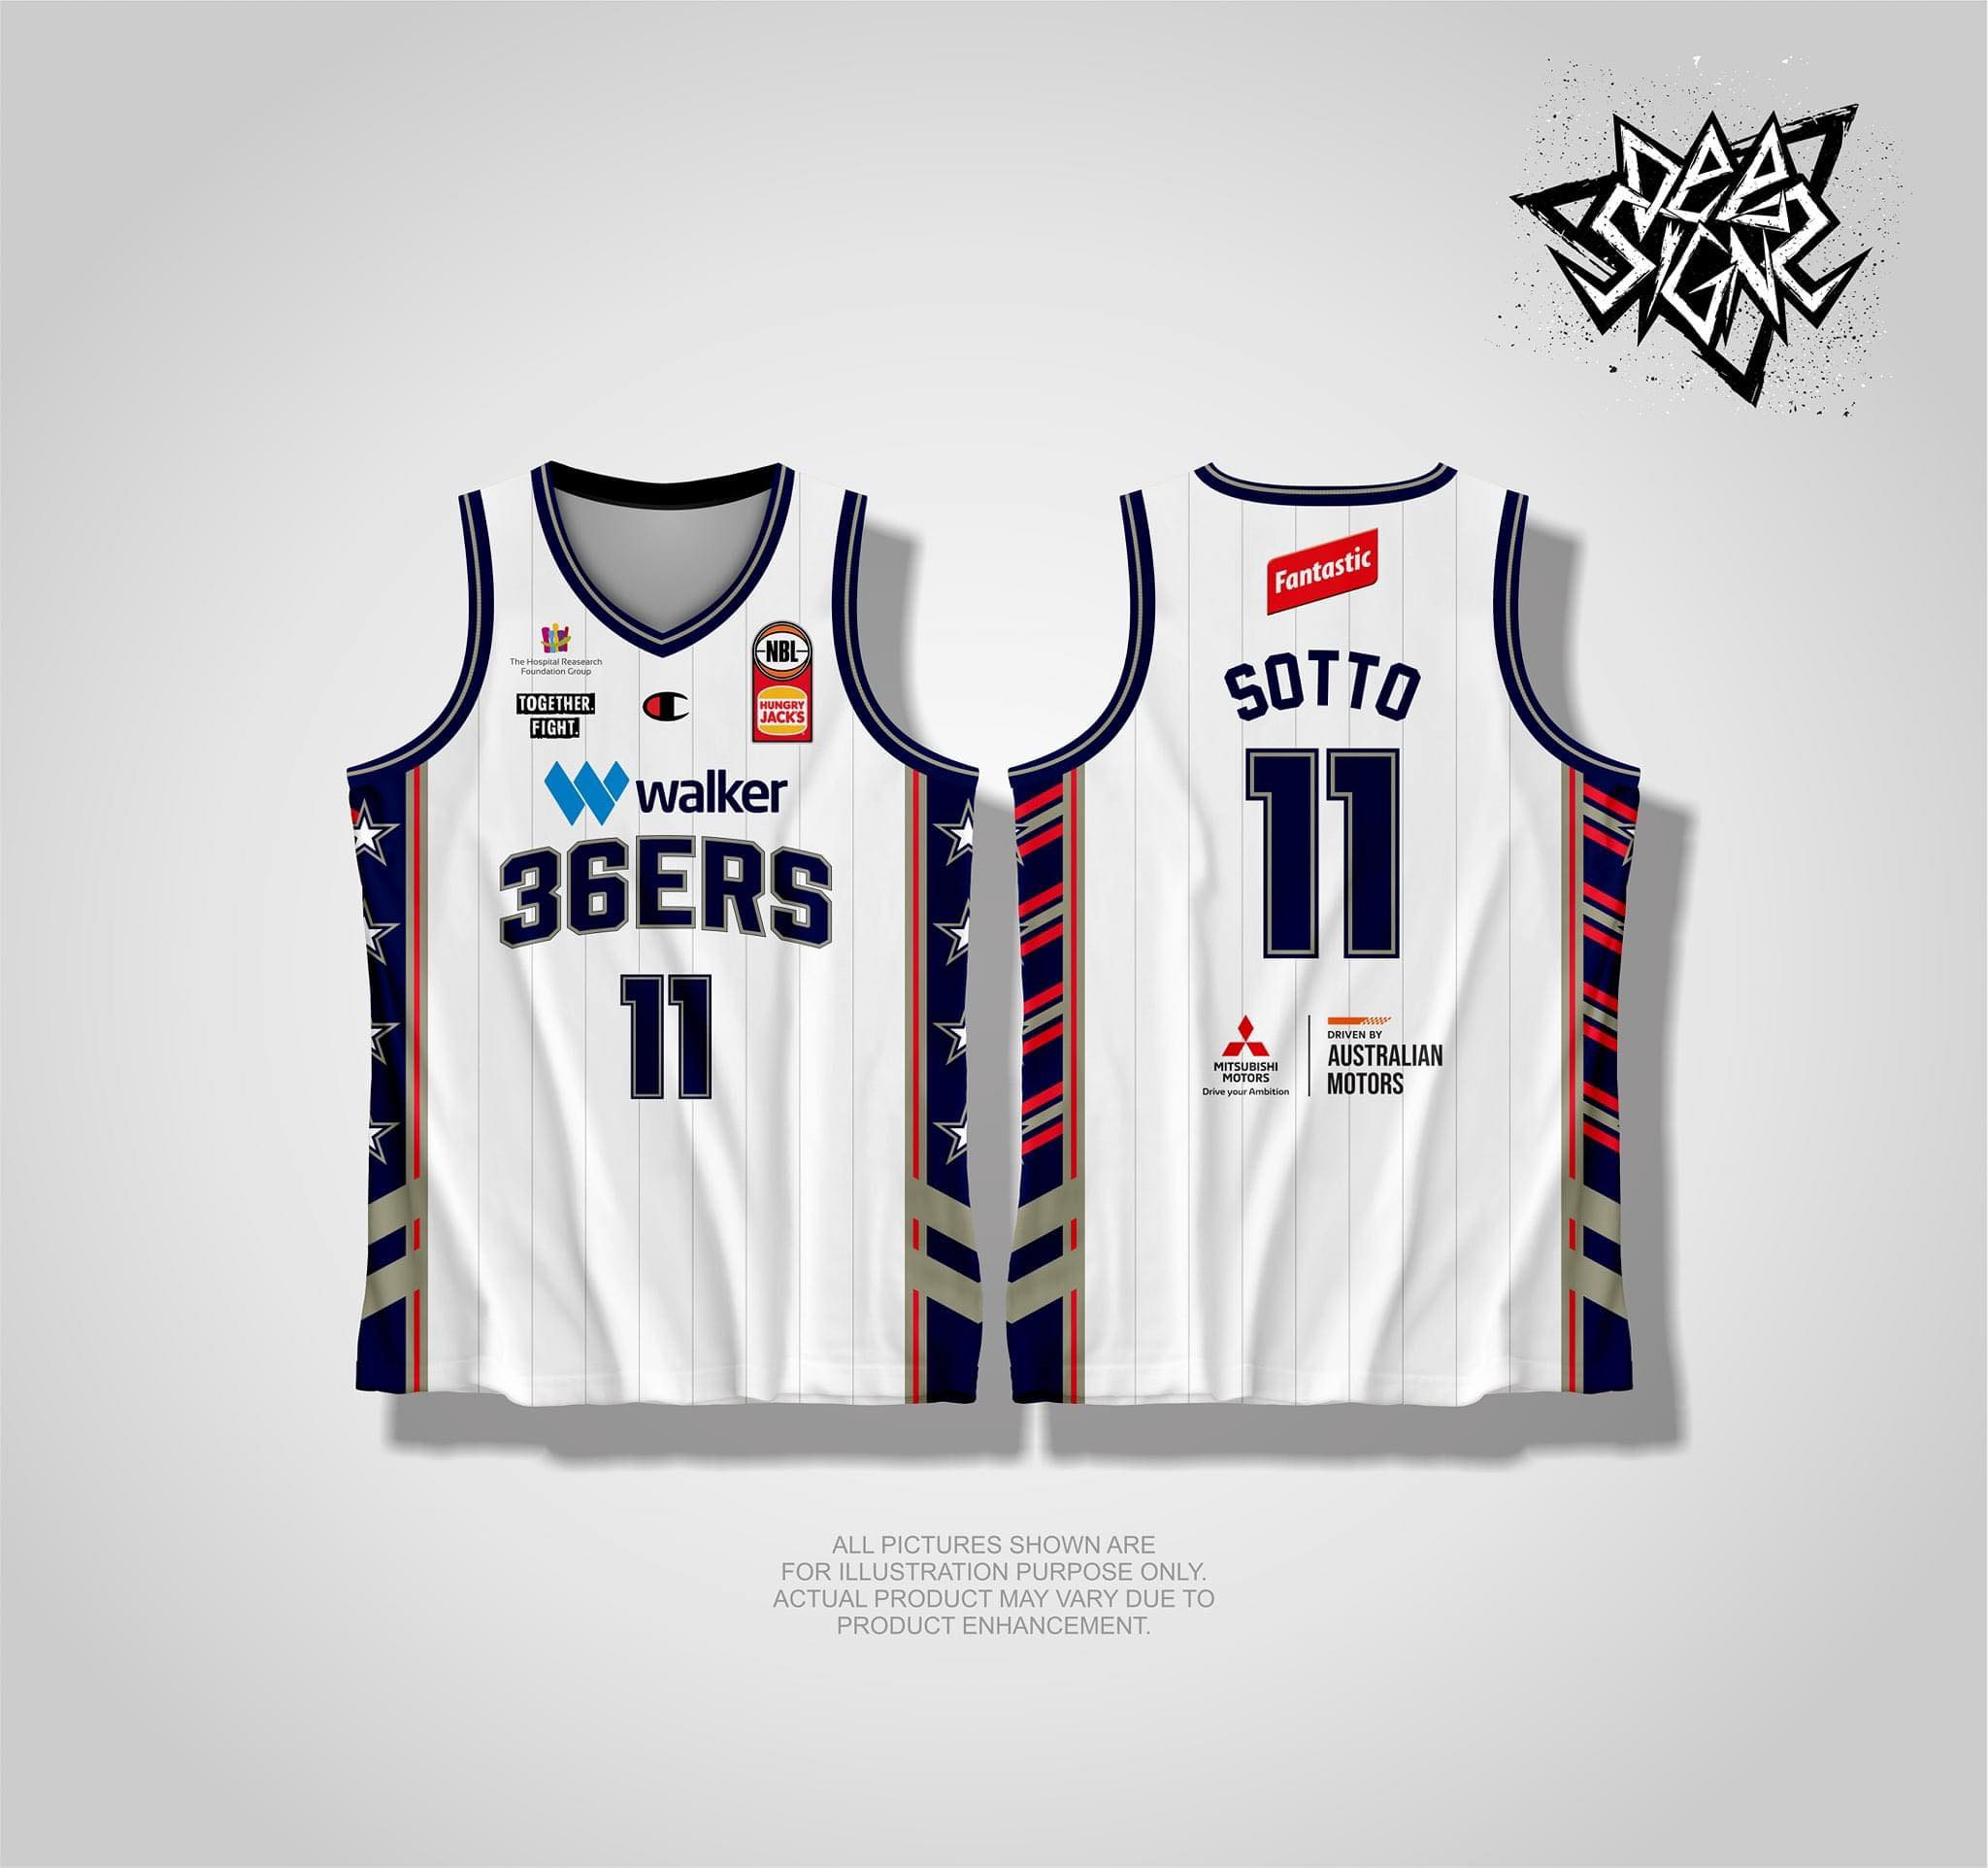 KAI SOTTO ADELAIDE 36ERS FULL SUBLIMATED JERSEY